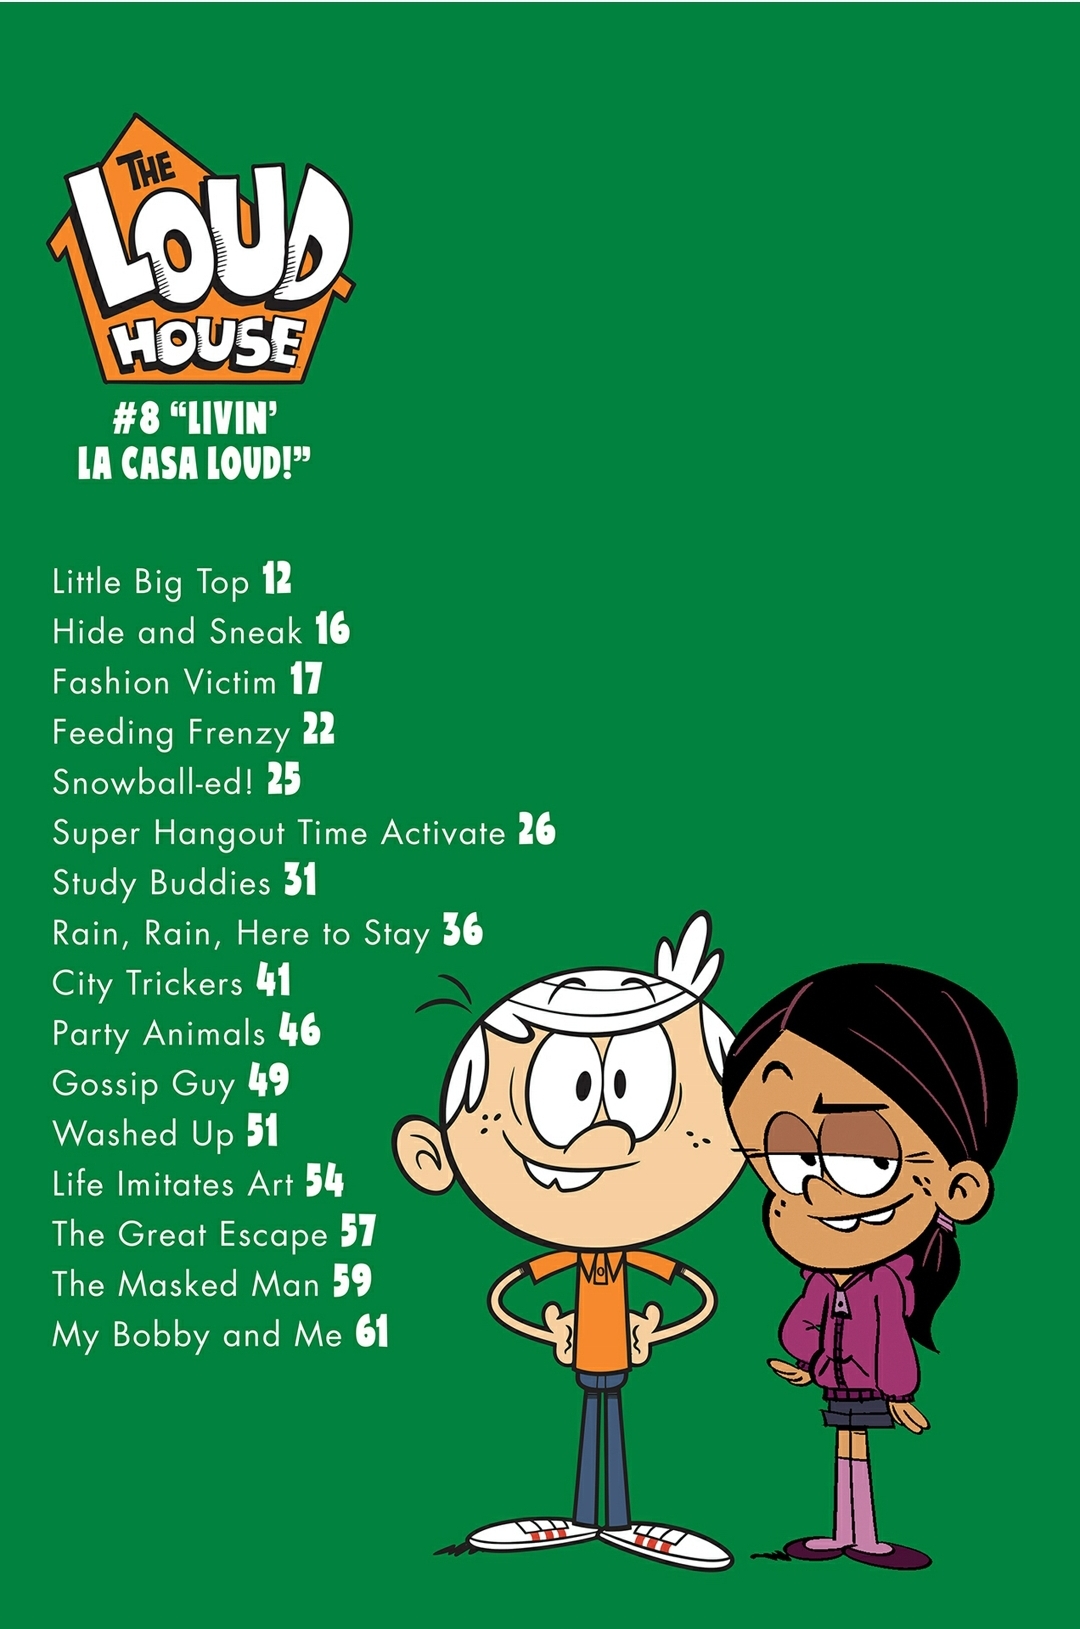 Read online The Loud House comic -  Issue #8 - 4